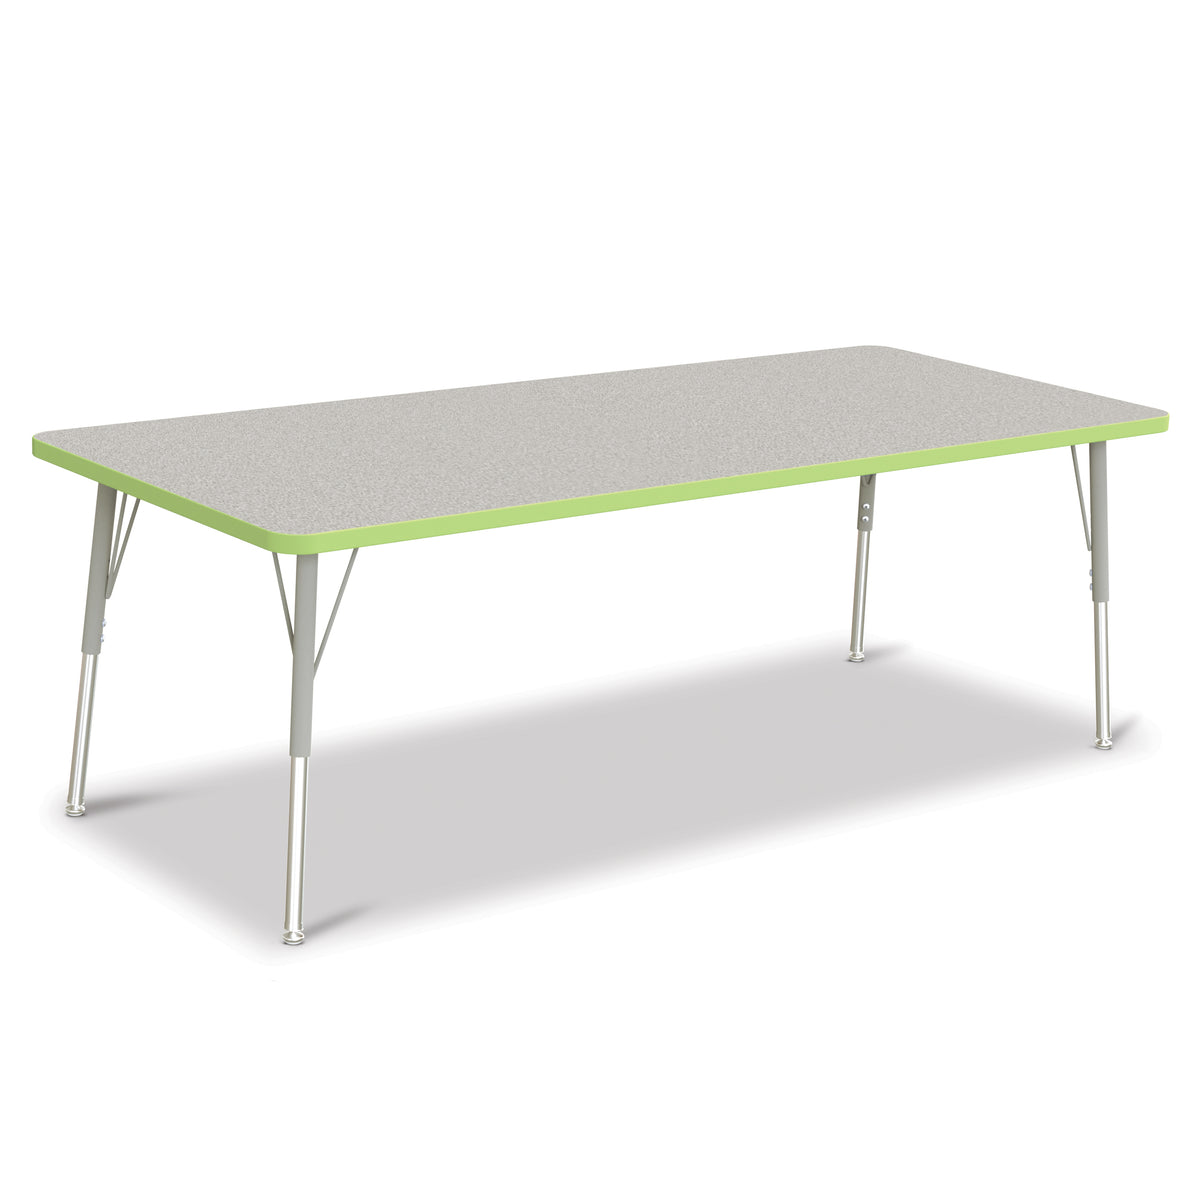 6413JCA130, Berries Rectangle Activity Table - 30" X 72", A-height -Gray/Key Lime/Gray